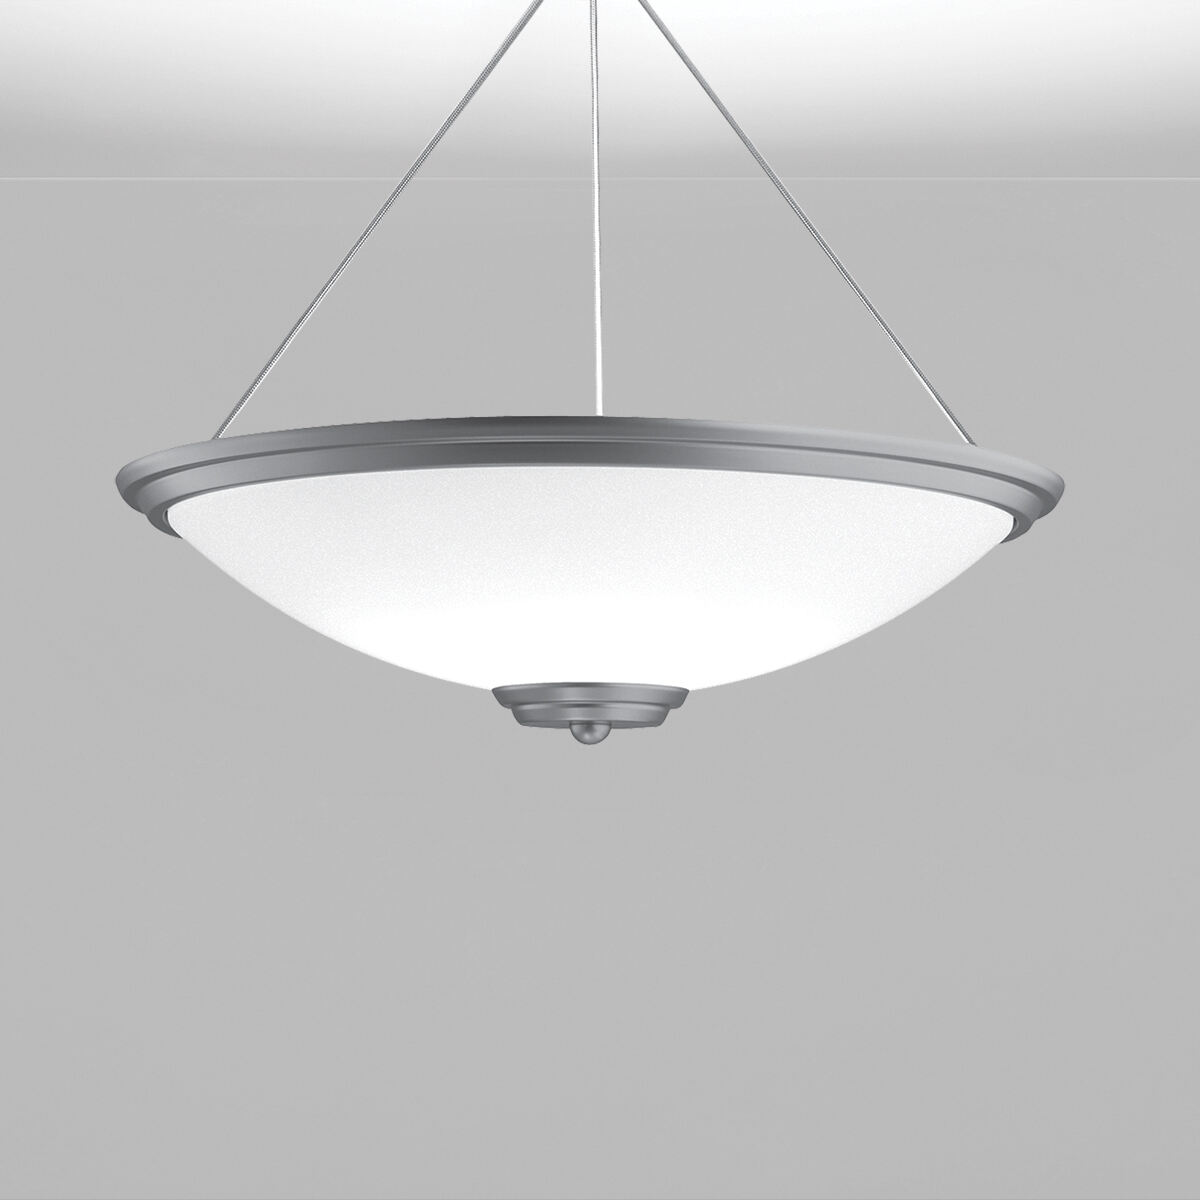 A large bowl pendant suspended with a cable and finial